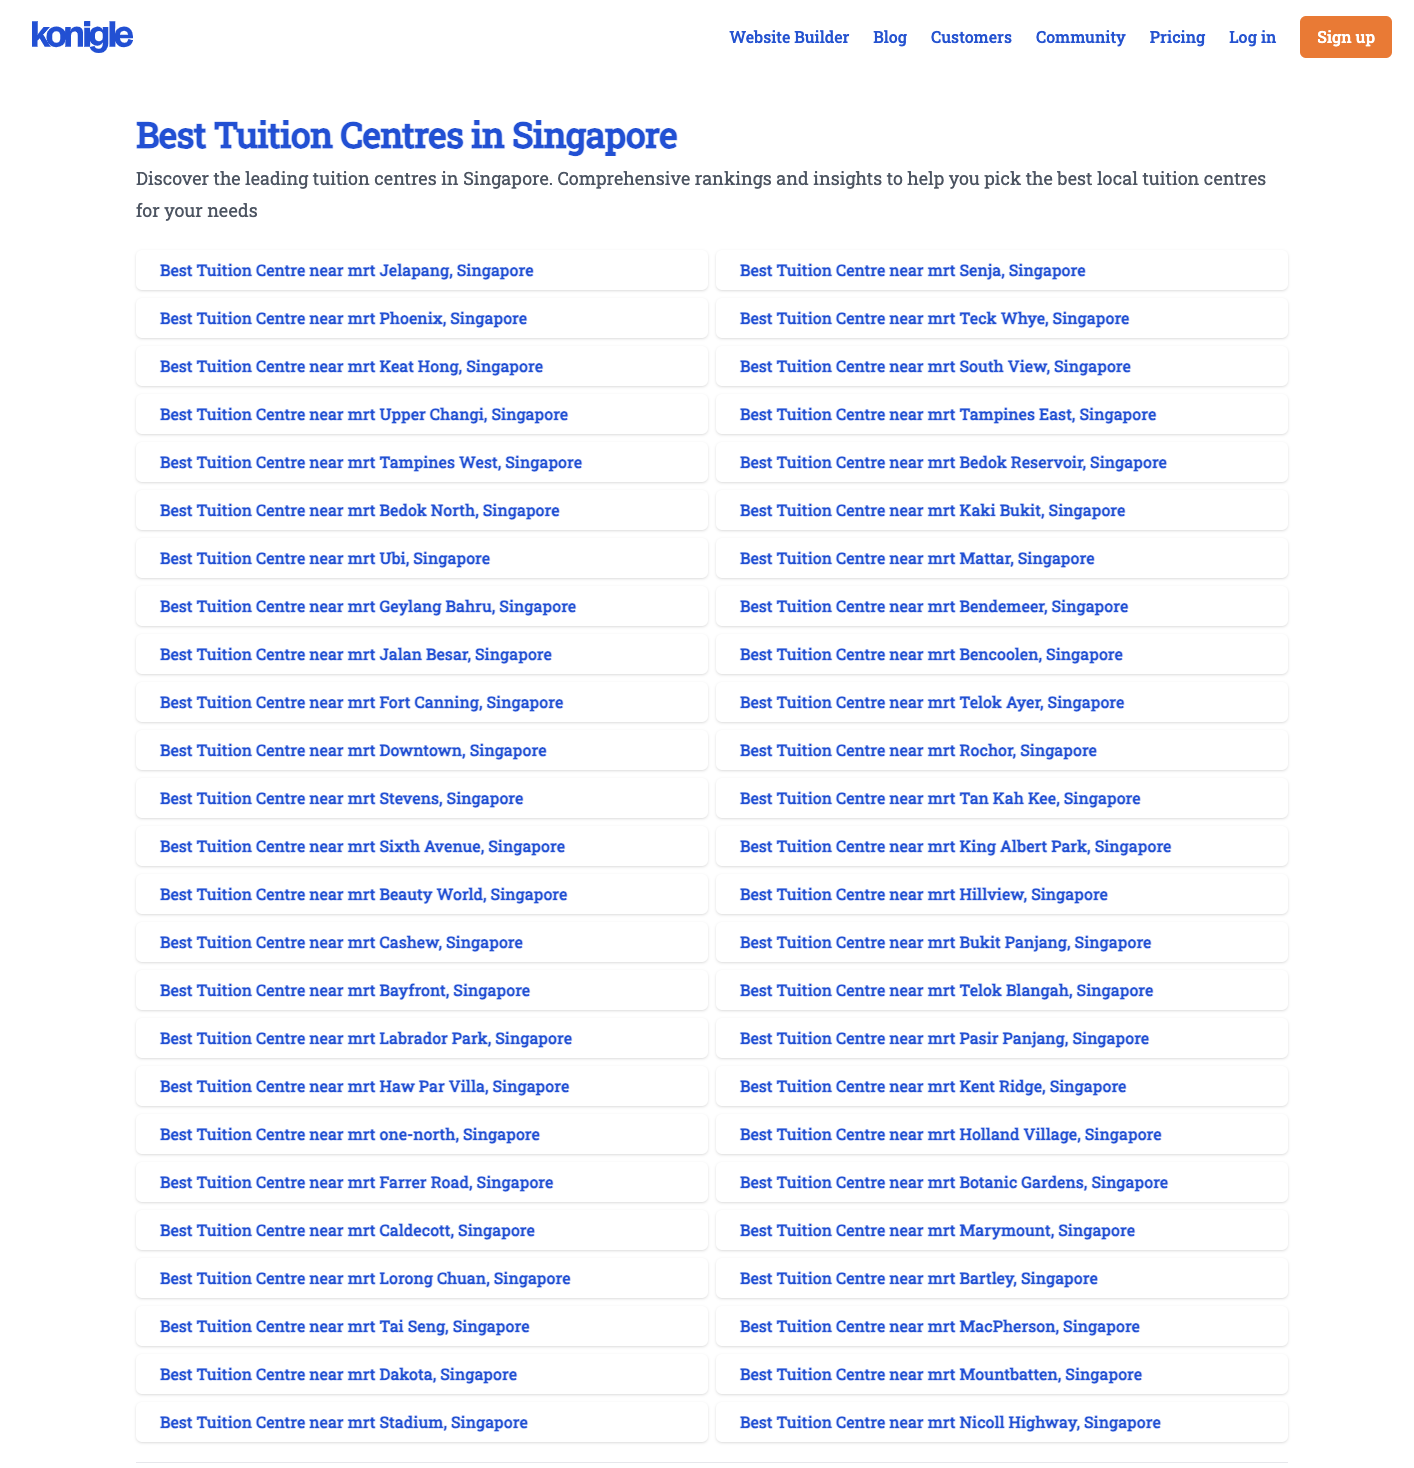 Tuition centre directory for Singapore